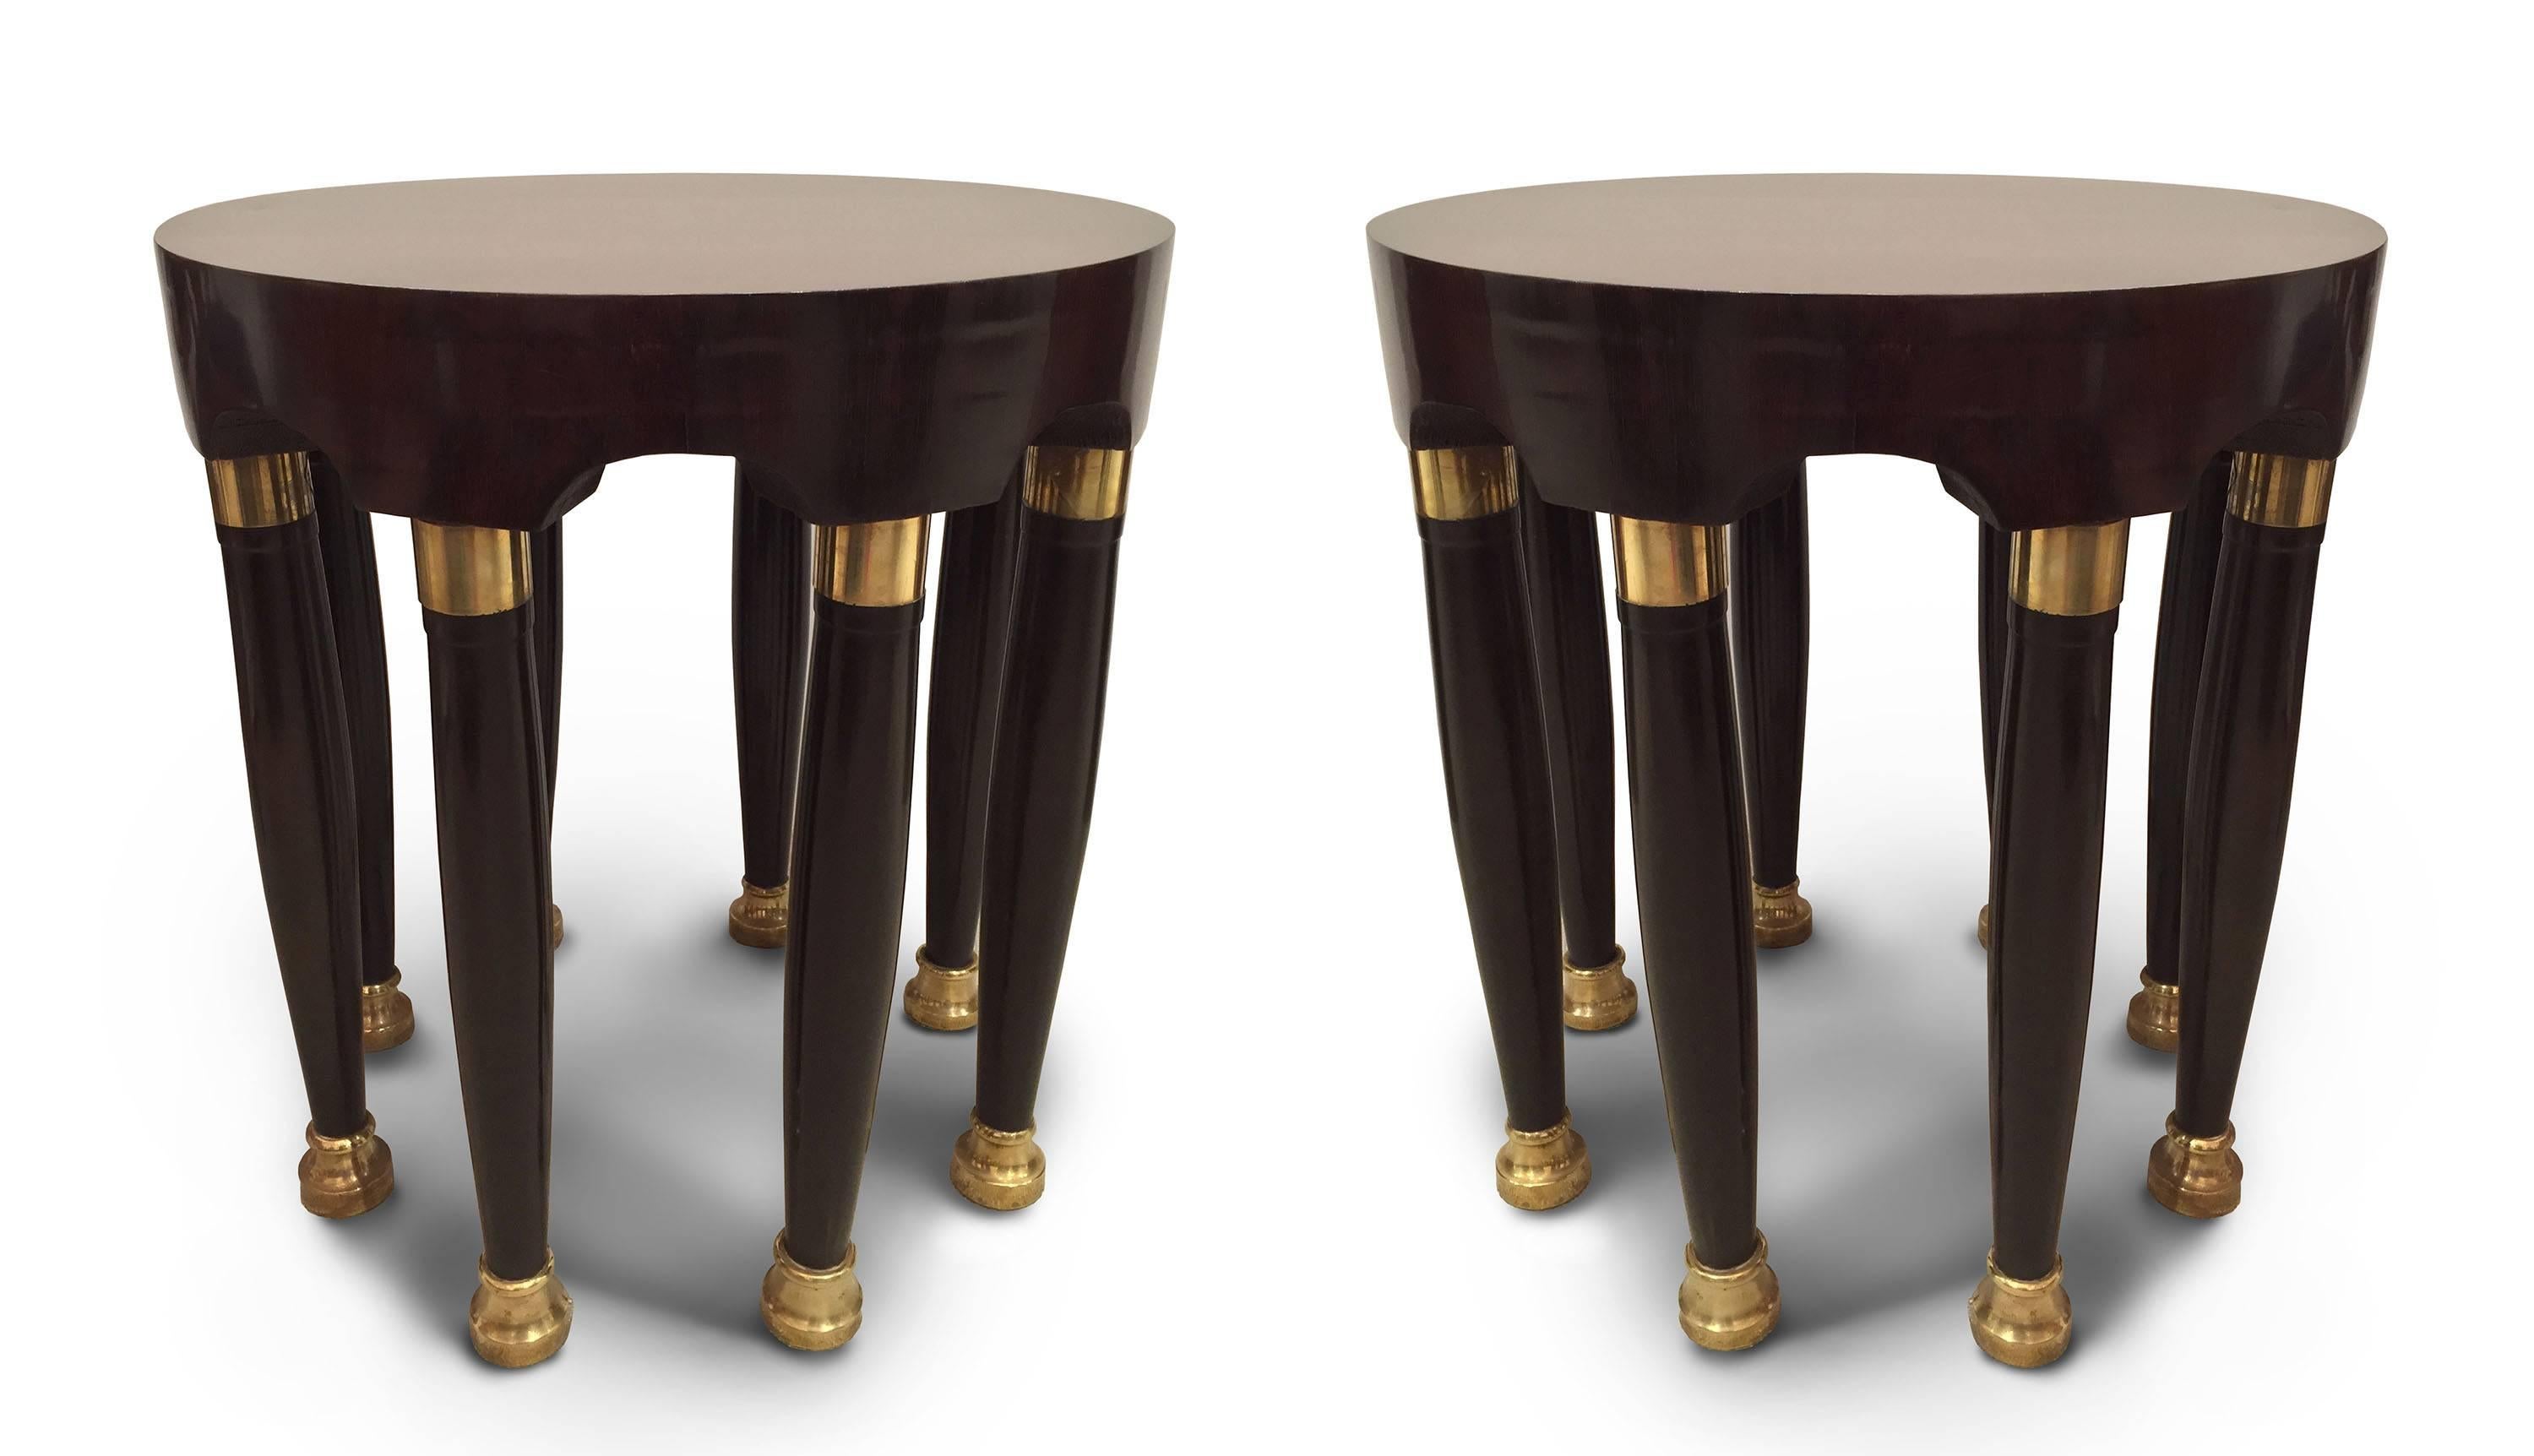 Pair of Continental (possibly Austrian) Art Deco round mahogany end tables
supported with eight ebonized legs having gilt trim brass round feet.